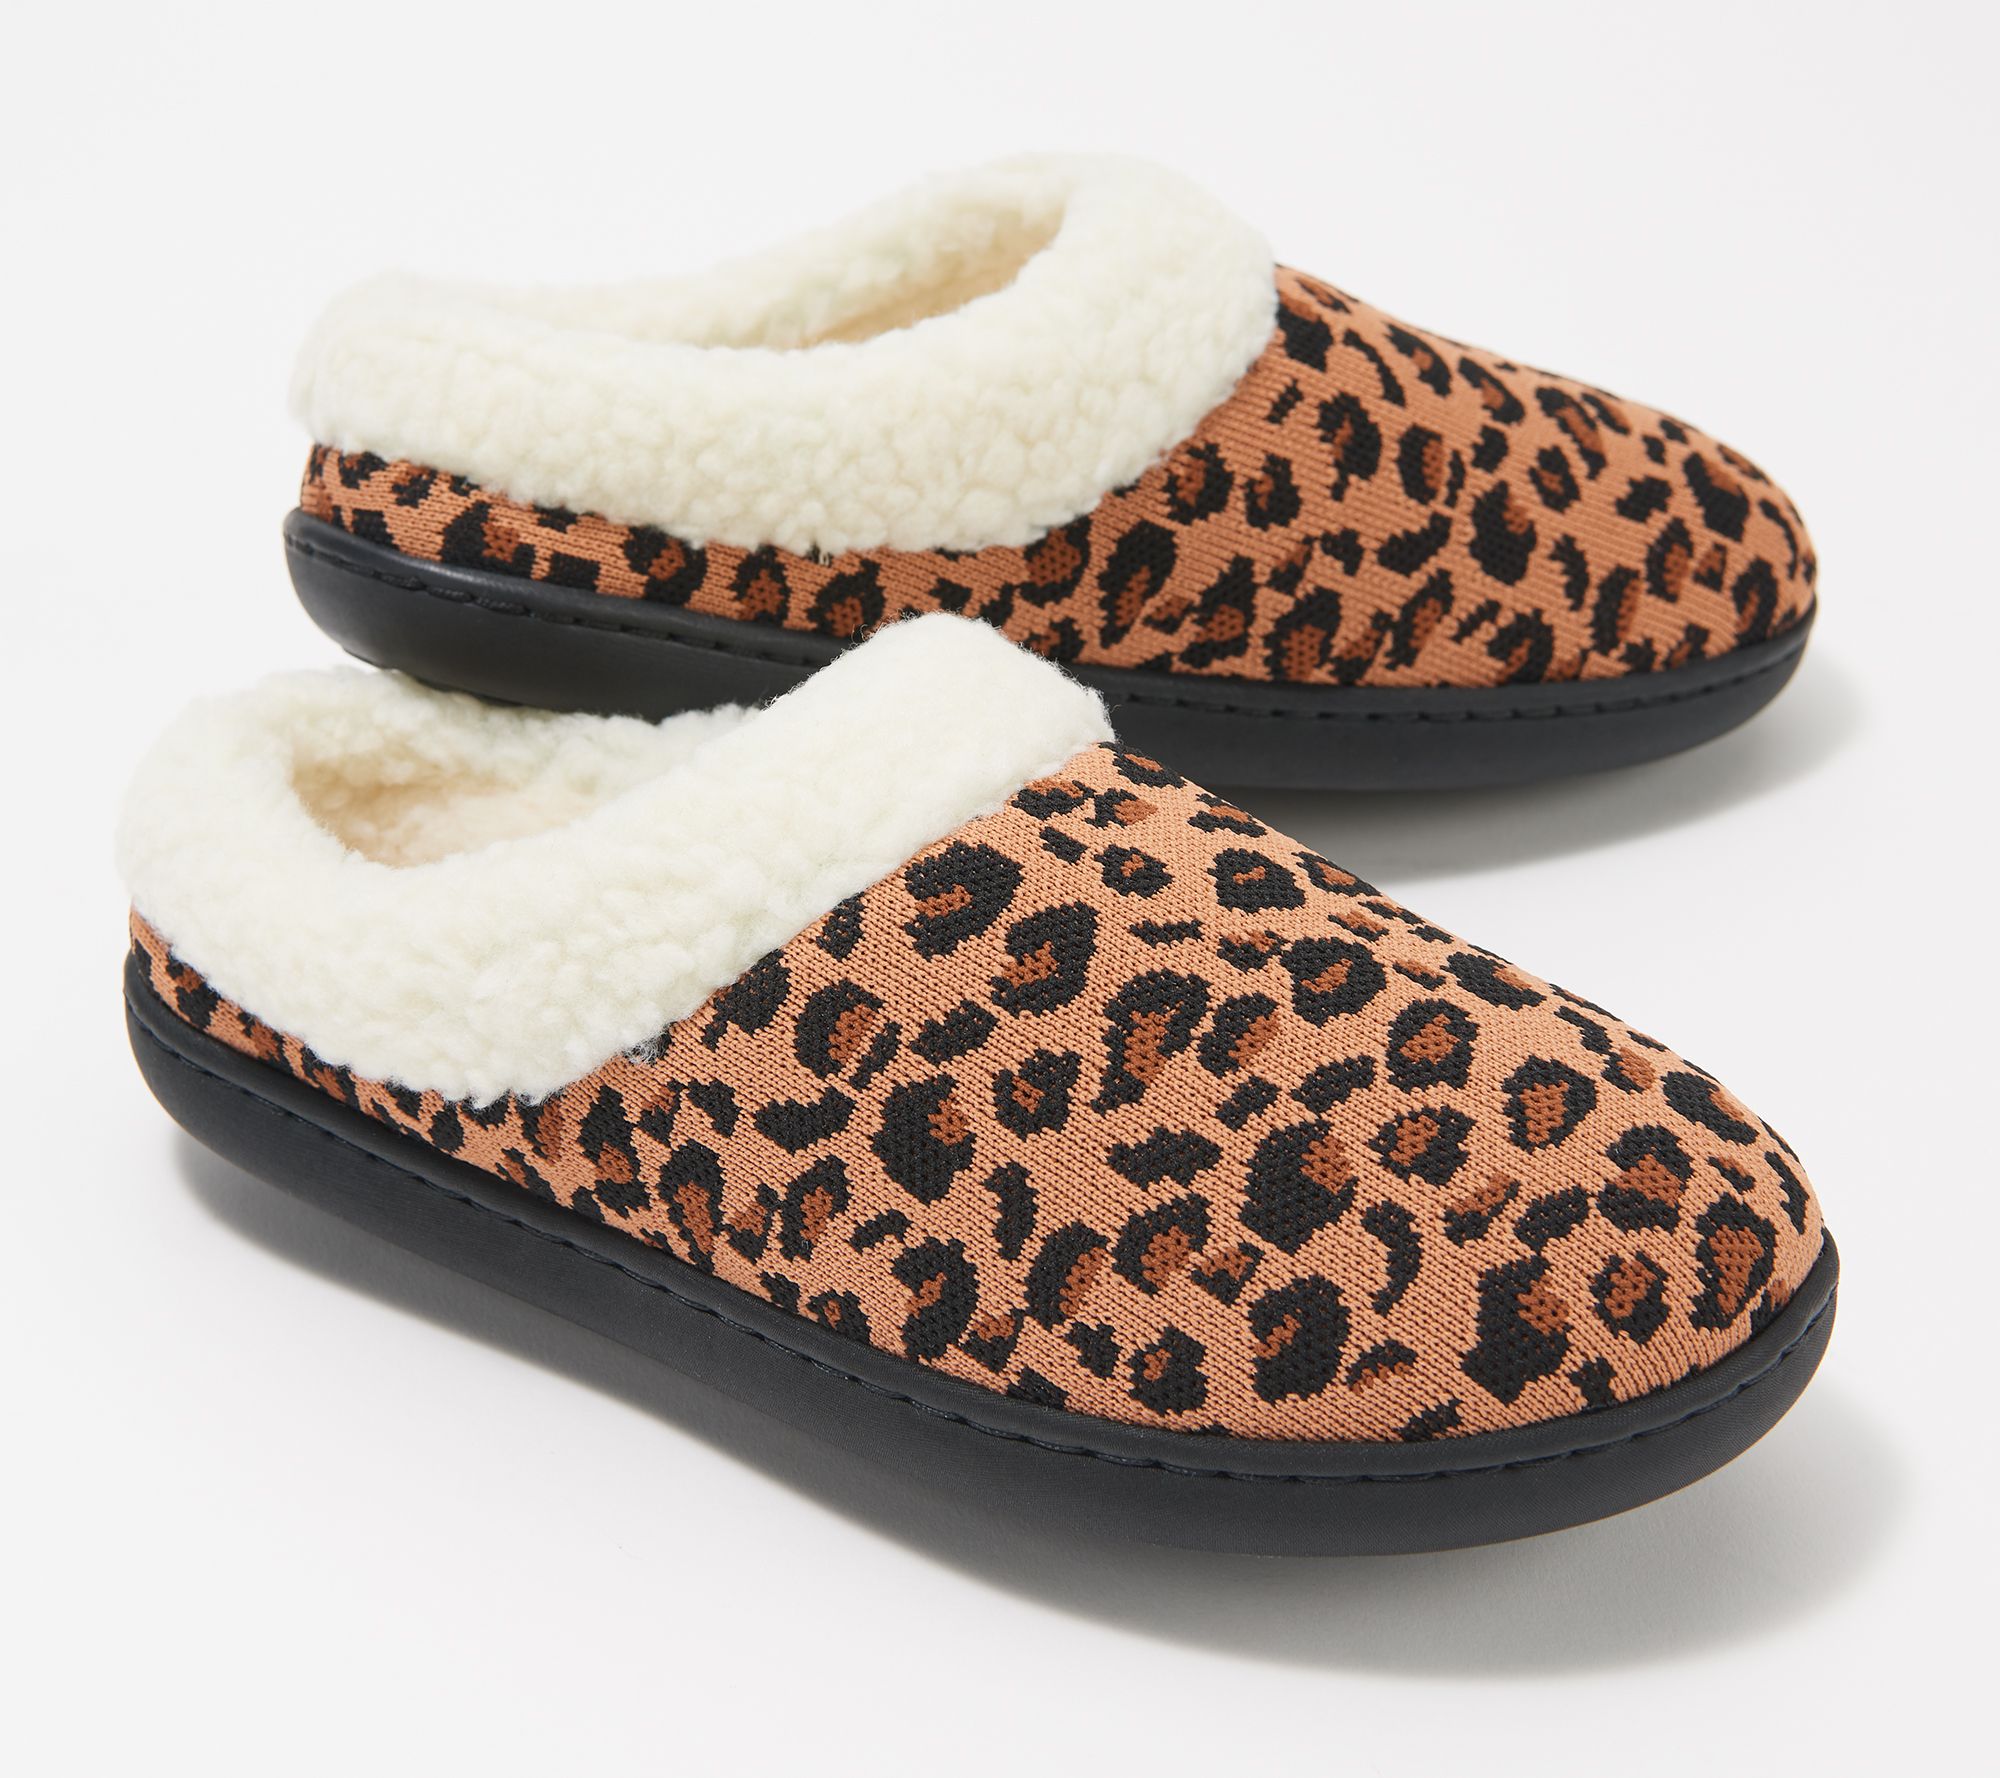 Ladies/Girls Samson slippers in sizes 3 to 8 available in 2 colours DOG MOTIF